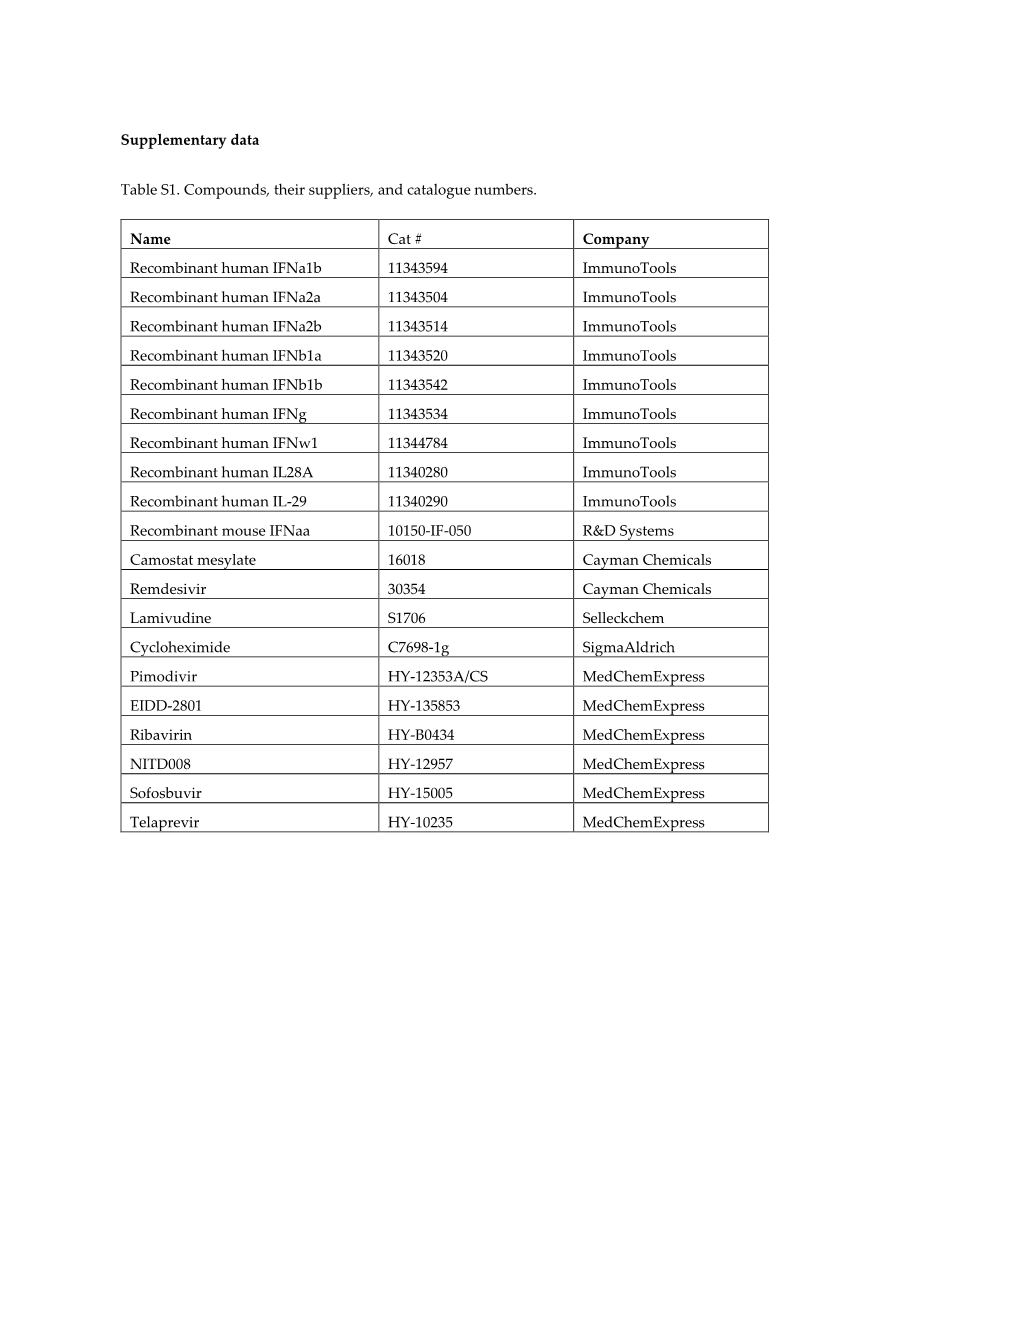 Supplementary Data Table S1. Compounds, Their Suppliers, And